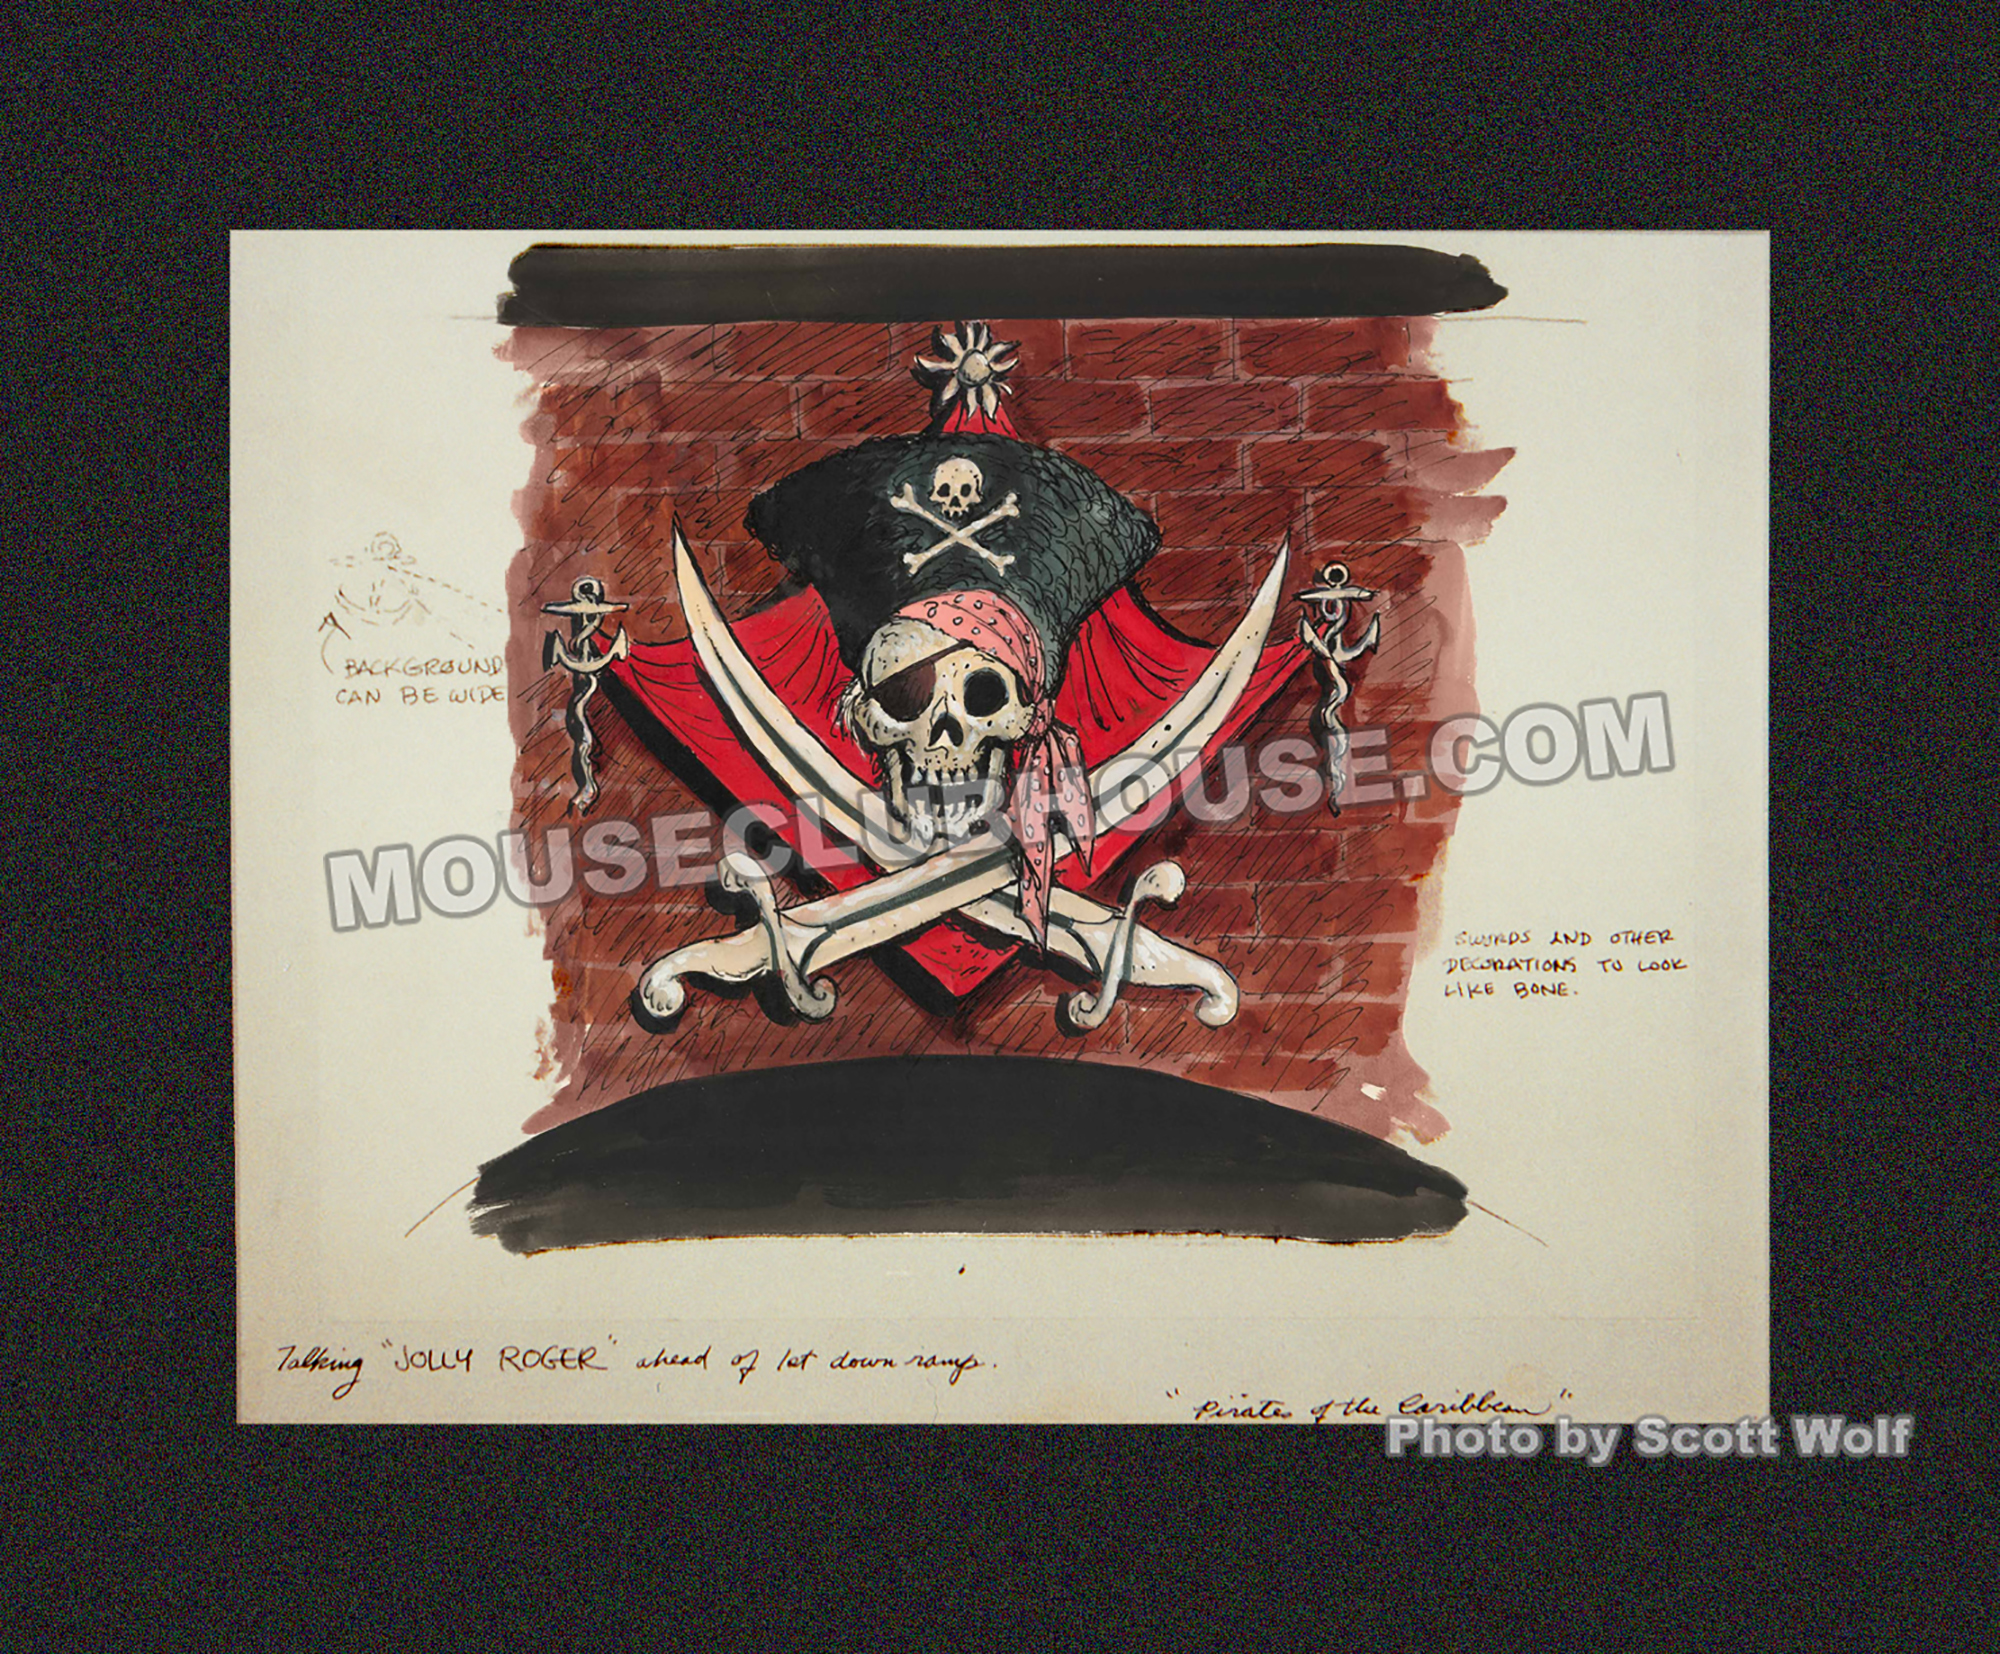 A display of Marc Davis' concept art for Pirates of the Caribbean was presented in the Disney Gallery